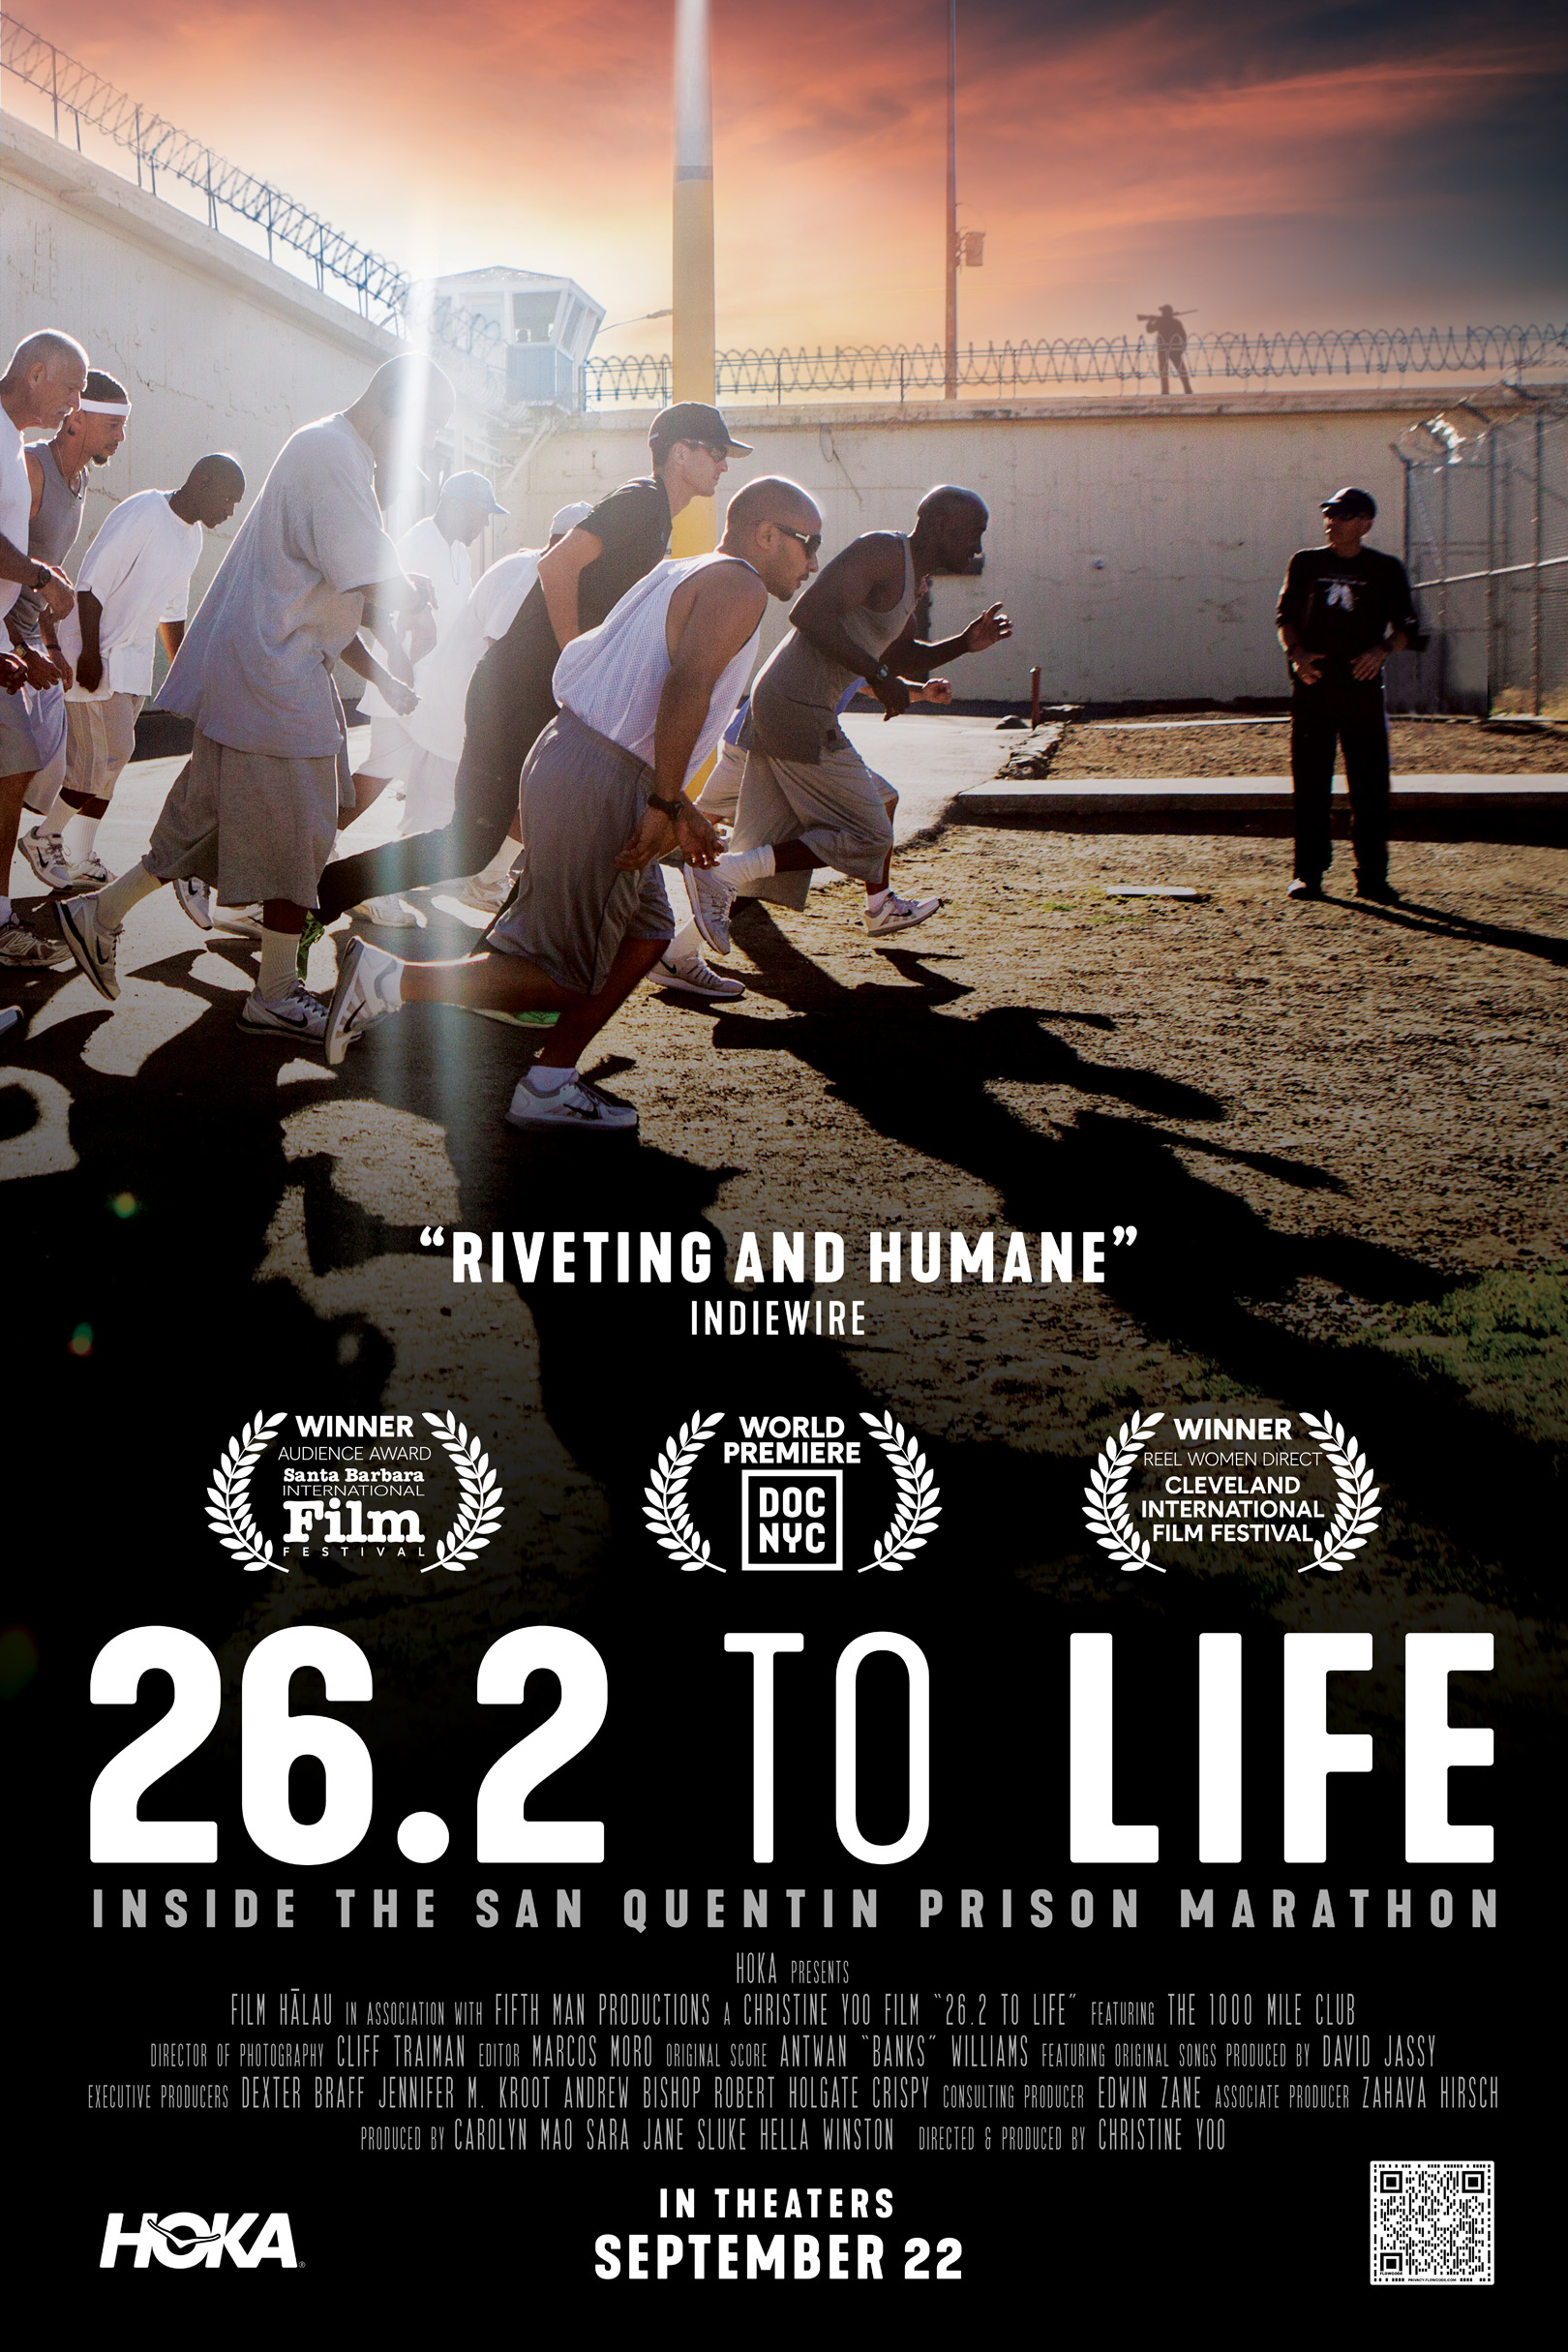 The promo image for "26.2 to Life" from director Christine Yoo.